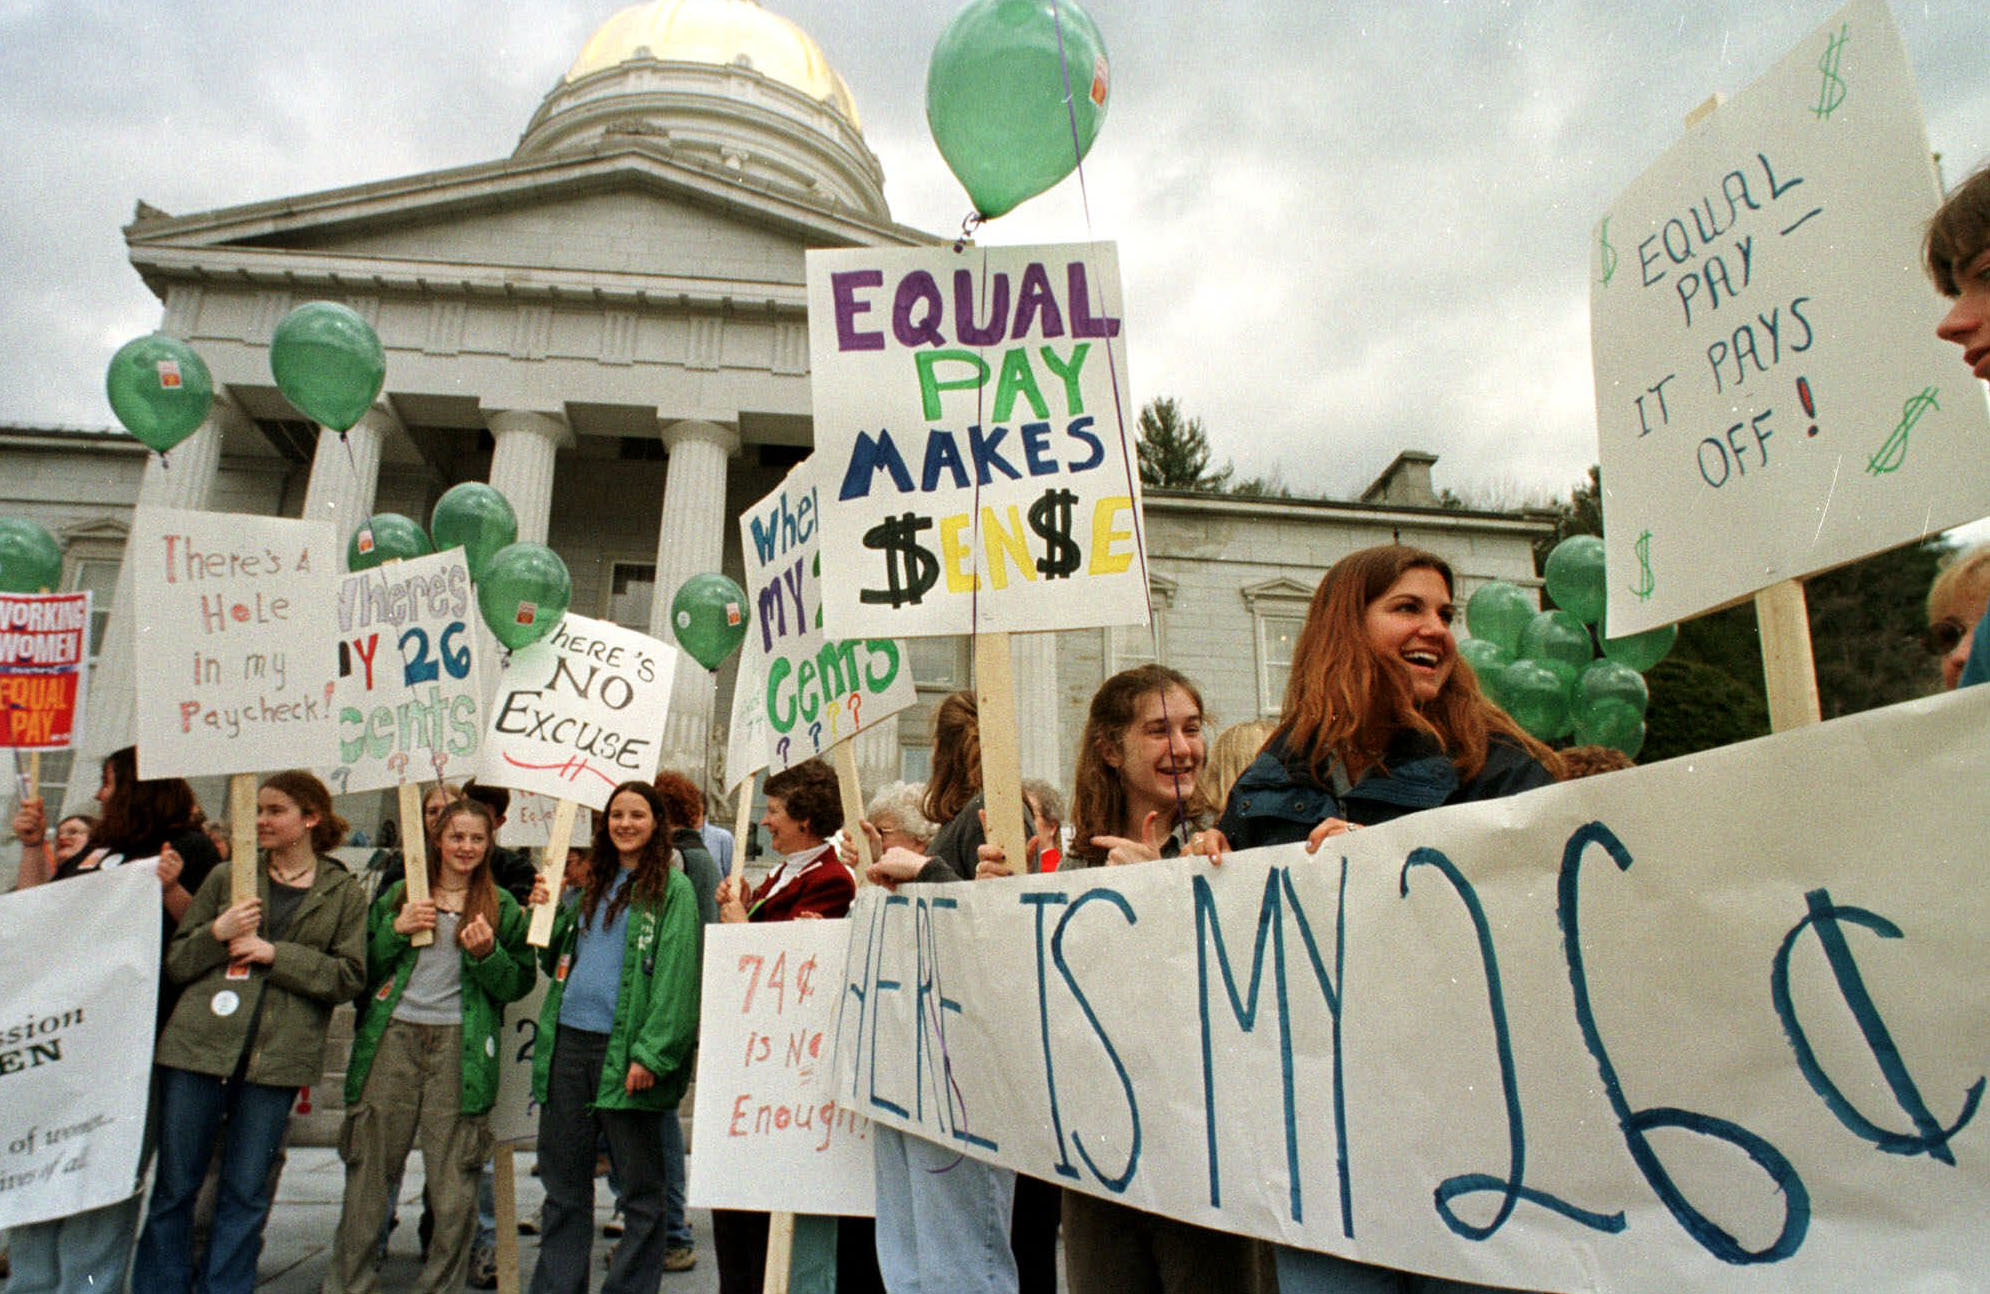 People gather on the steps of the statehouse in Vermont for a rally on National Equal Pay Day. Recent surveys show that women earn more than men in only 7 out of 500 professions. (AP/Toby Talbot)